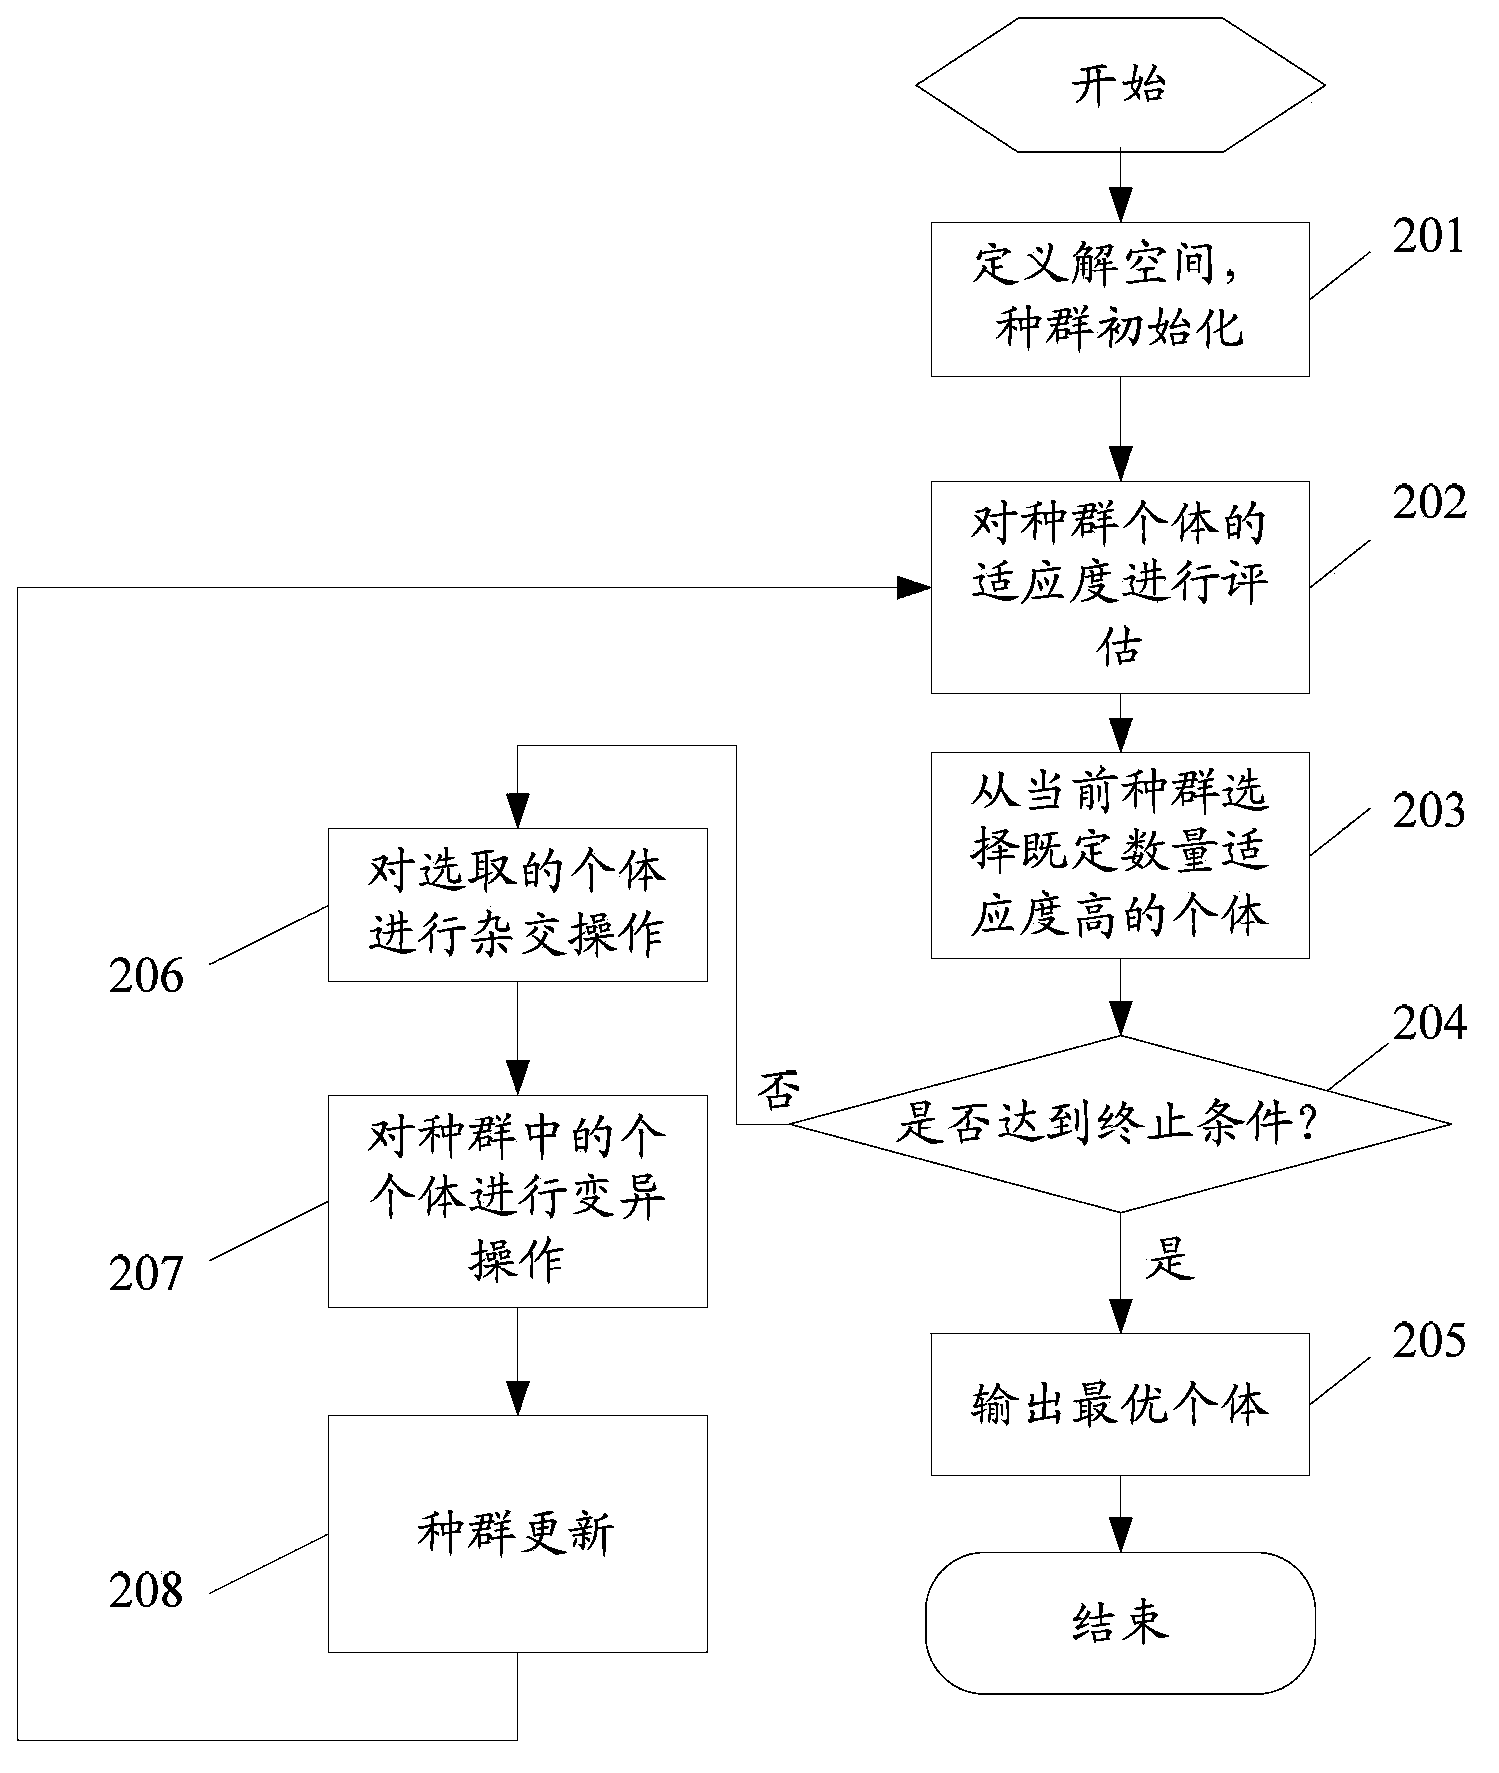 Method and system for evaluating communication service customer quality of experience